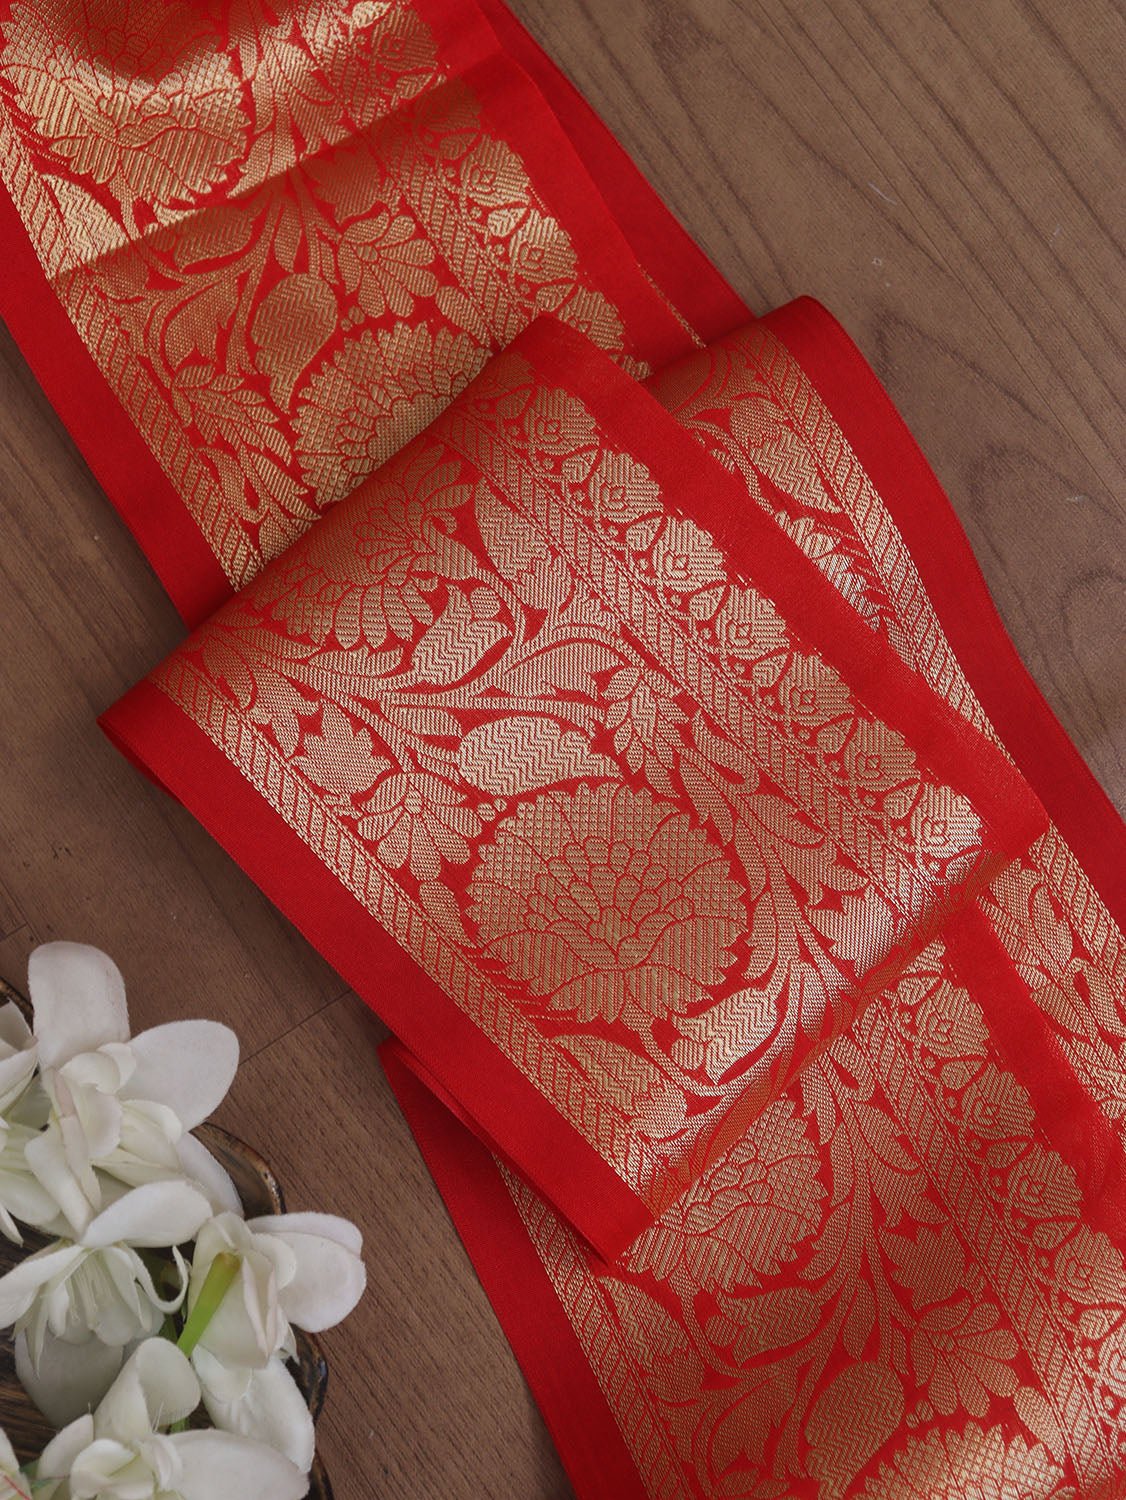 Shop the Exquisite Red Banarasi Silk Lace (1 Mtr) for Elegant